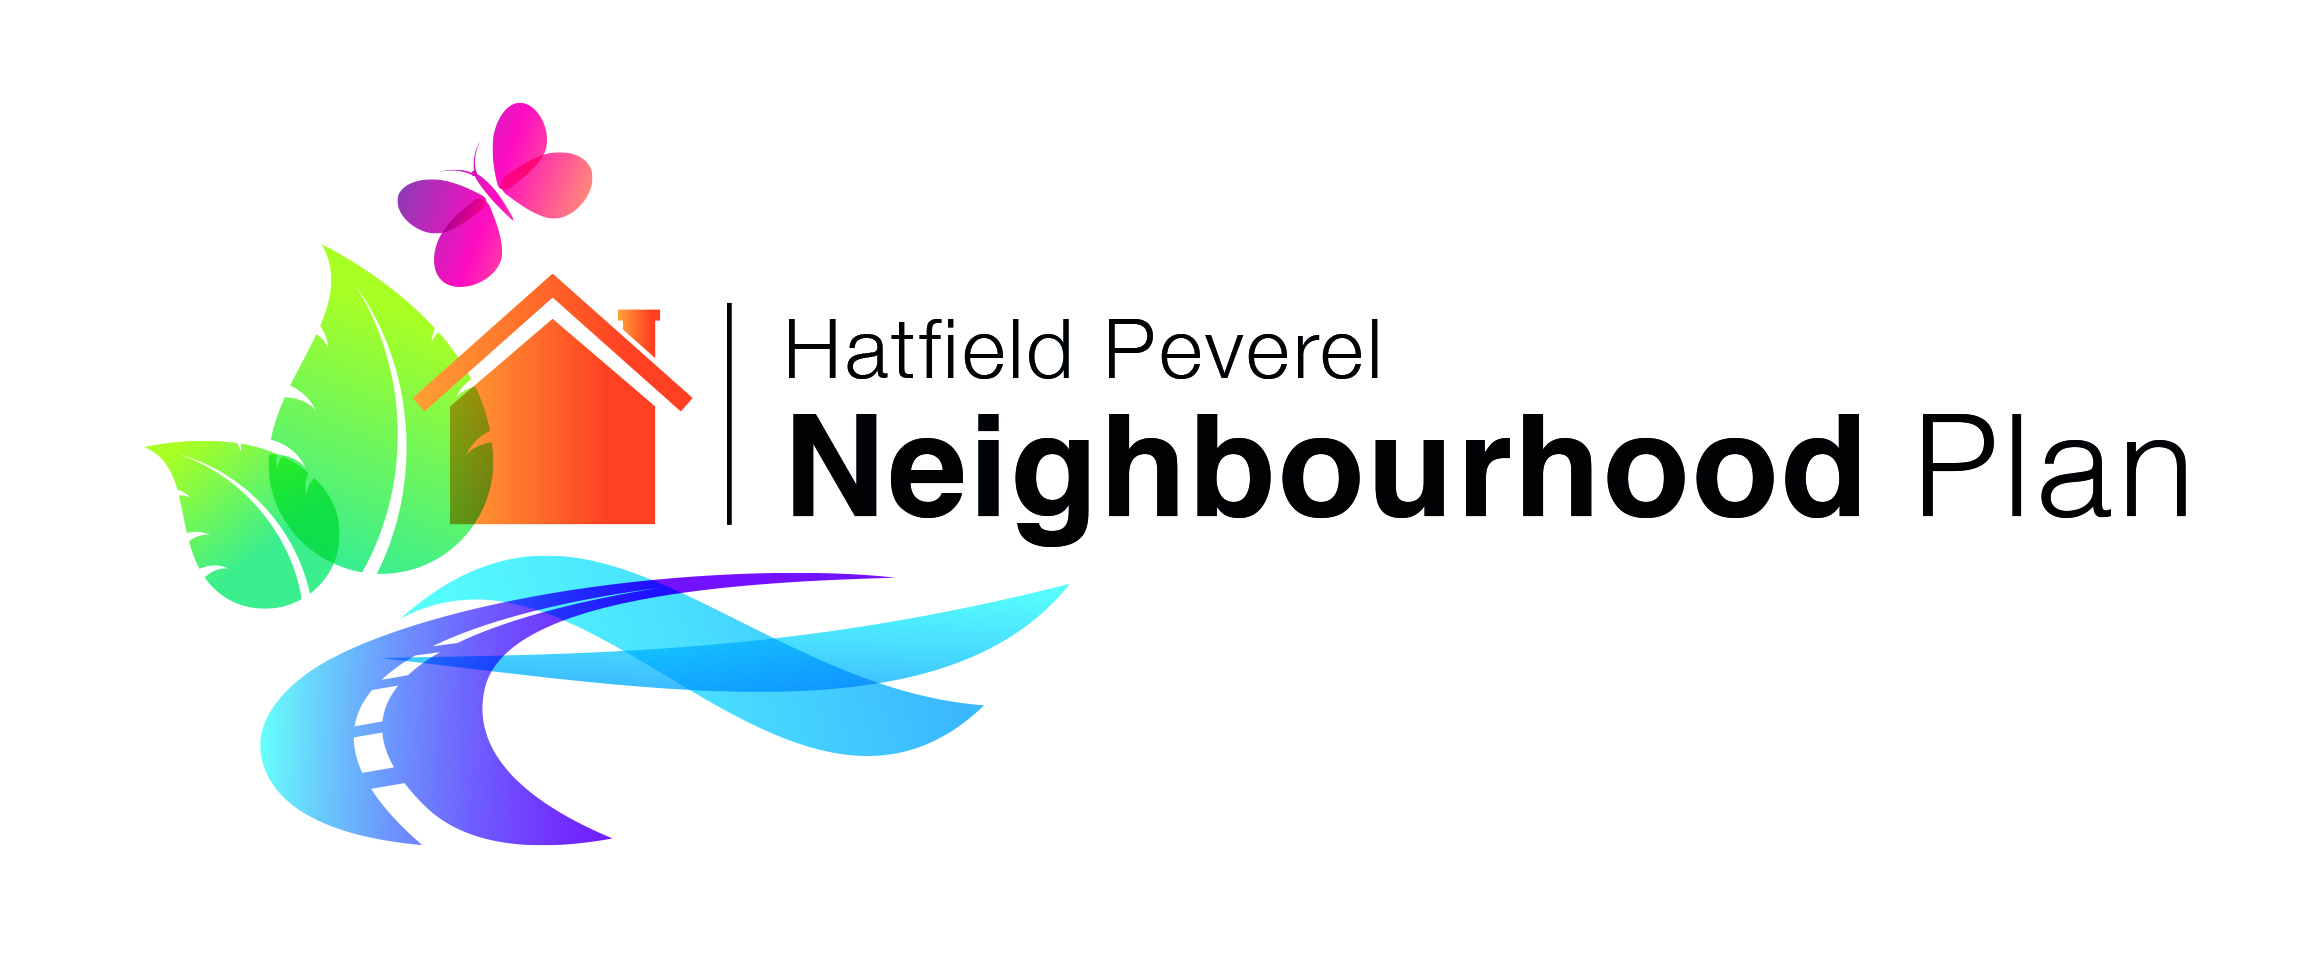 Text saying Hatfield Peverel Neighbourhood plan with abstract graphic of a house, road and leaf